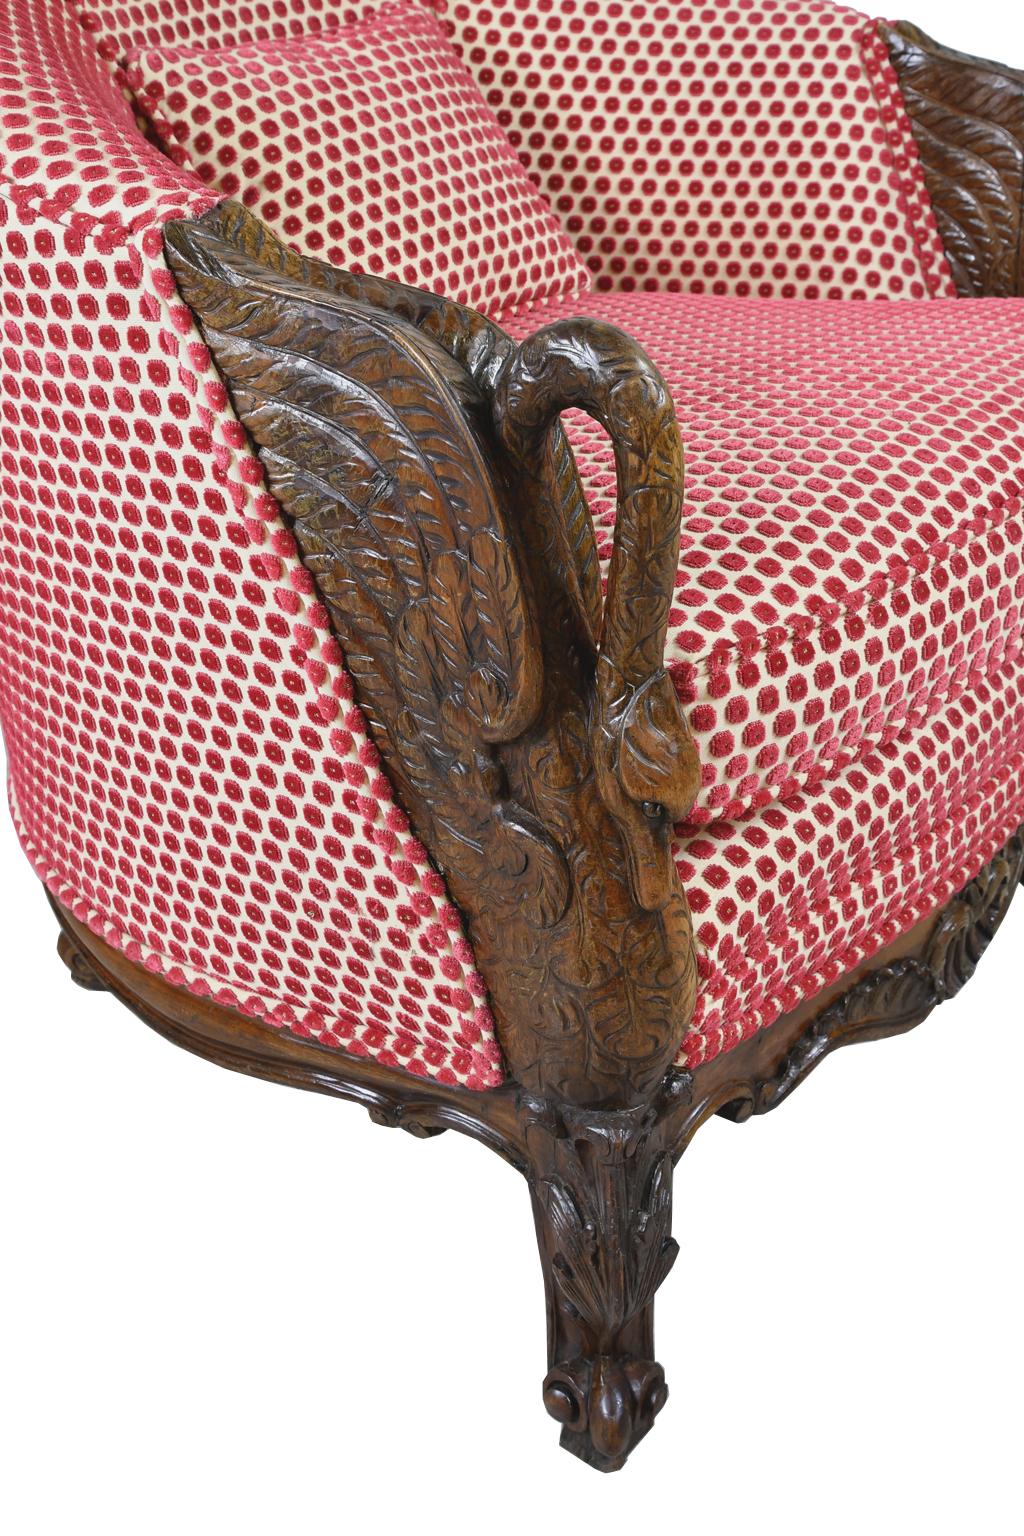 Hand-Carved Belle Époque Upholstered Club Chair in Rose-Colored Cut Velvet with Carved Swans